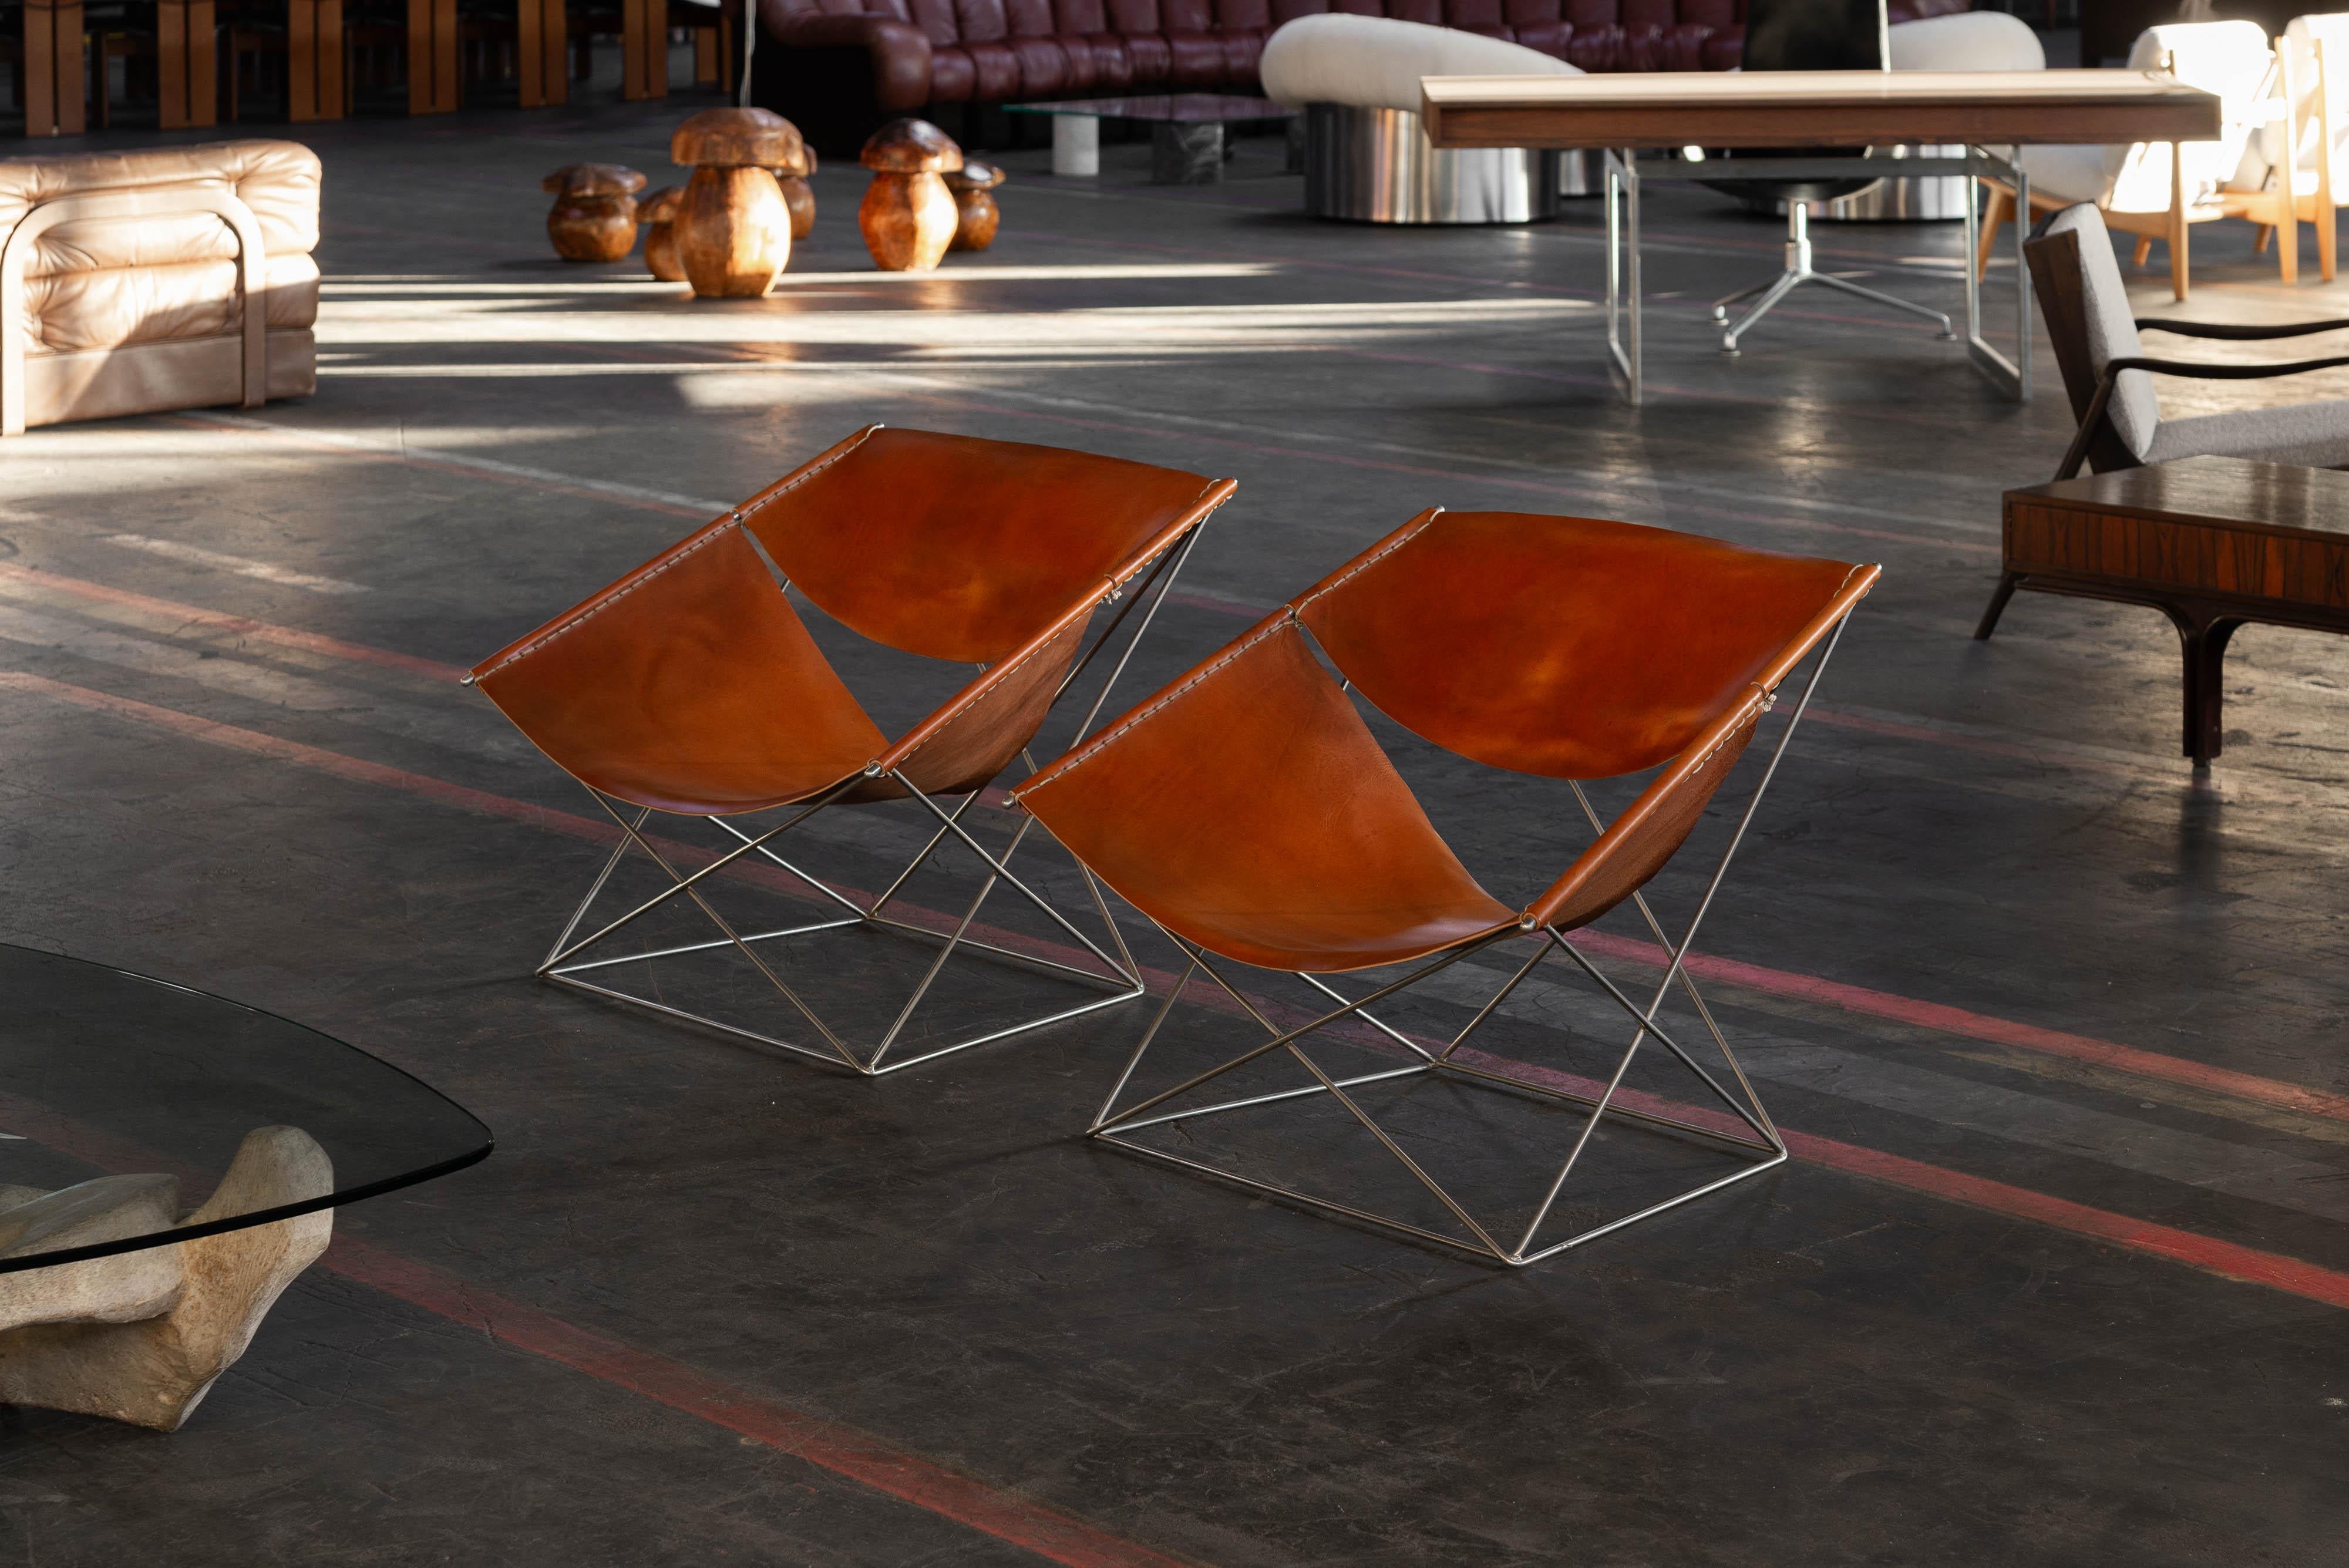 Striking pair of model F675 chairs designed by Pierre Paulin and manufactured by Artifort, The Netherlands 1963. These chairs have nickel-plated geometric frames that are visually stunning! The minimalistic frames against the rich and thick cognac